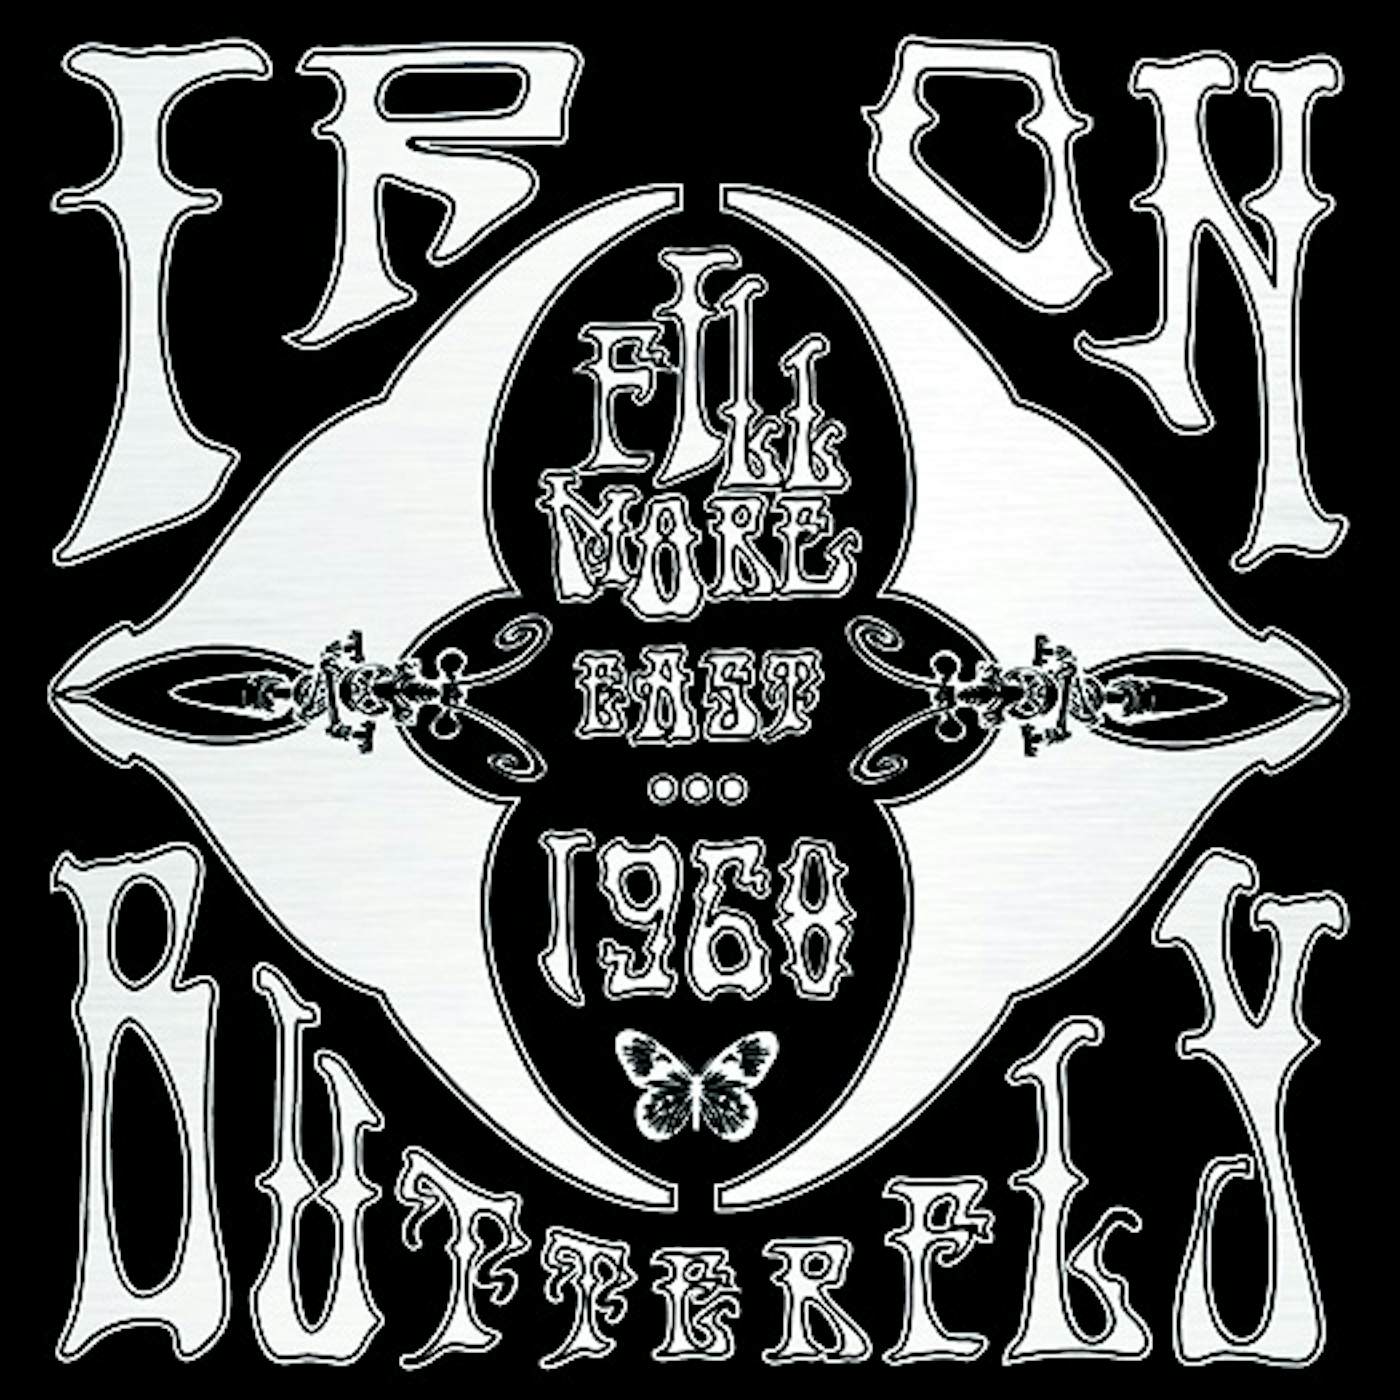 Iron Butterfly FILLMORE EAST 1968 CD